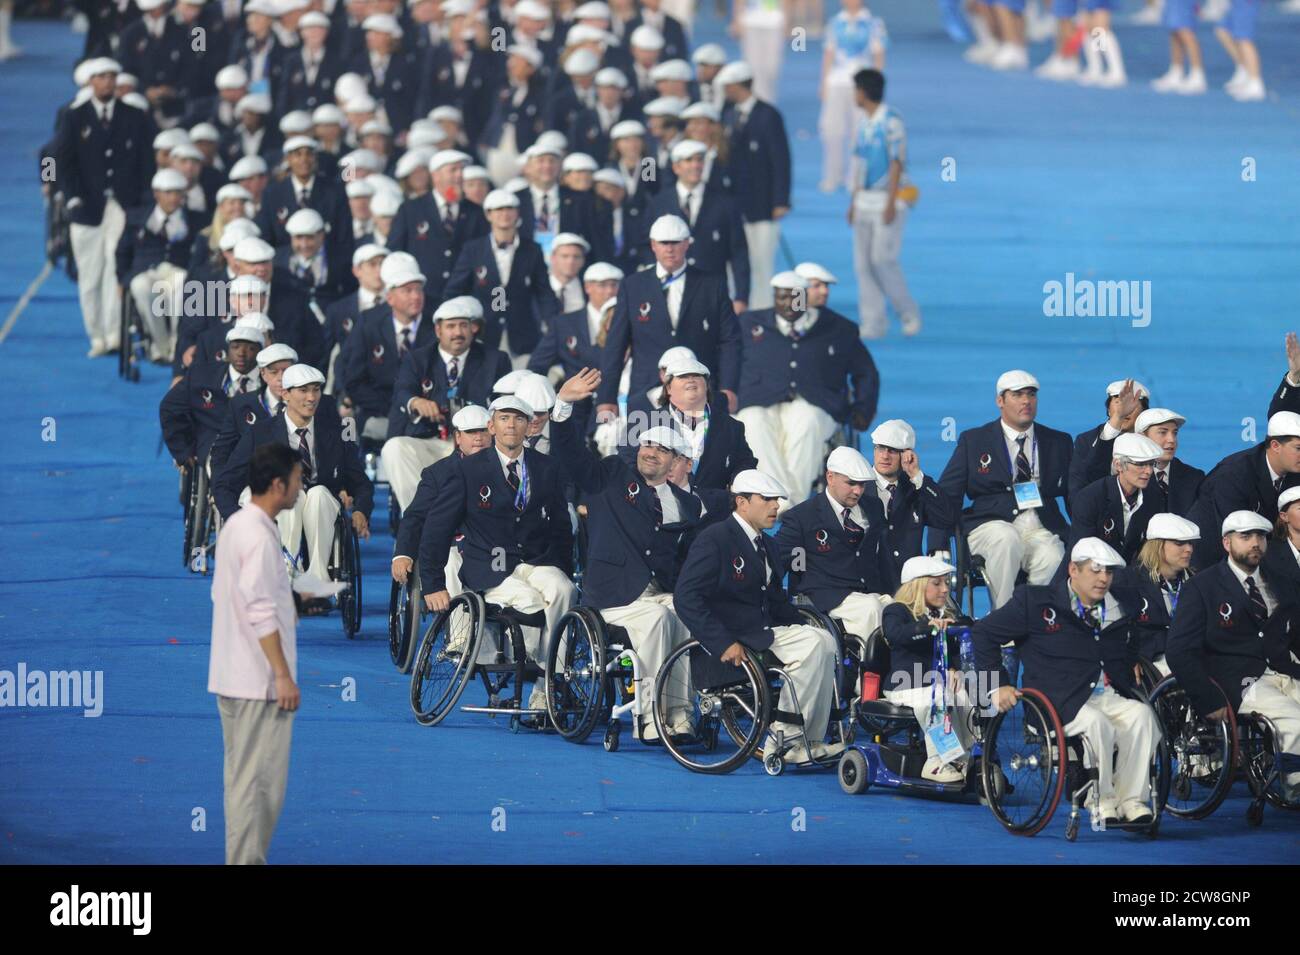 Beijing, China  September 6, 2008: Athletes and officials from the United States at the opening ceremonies of the Beijing Paralympics at China's National Stadium, known as the Bird's Nest.  ©Bob Daemmrich Stock Photo